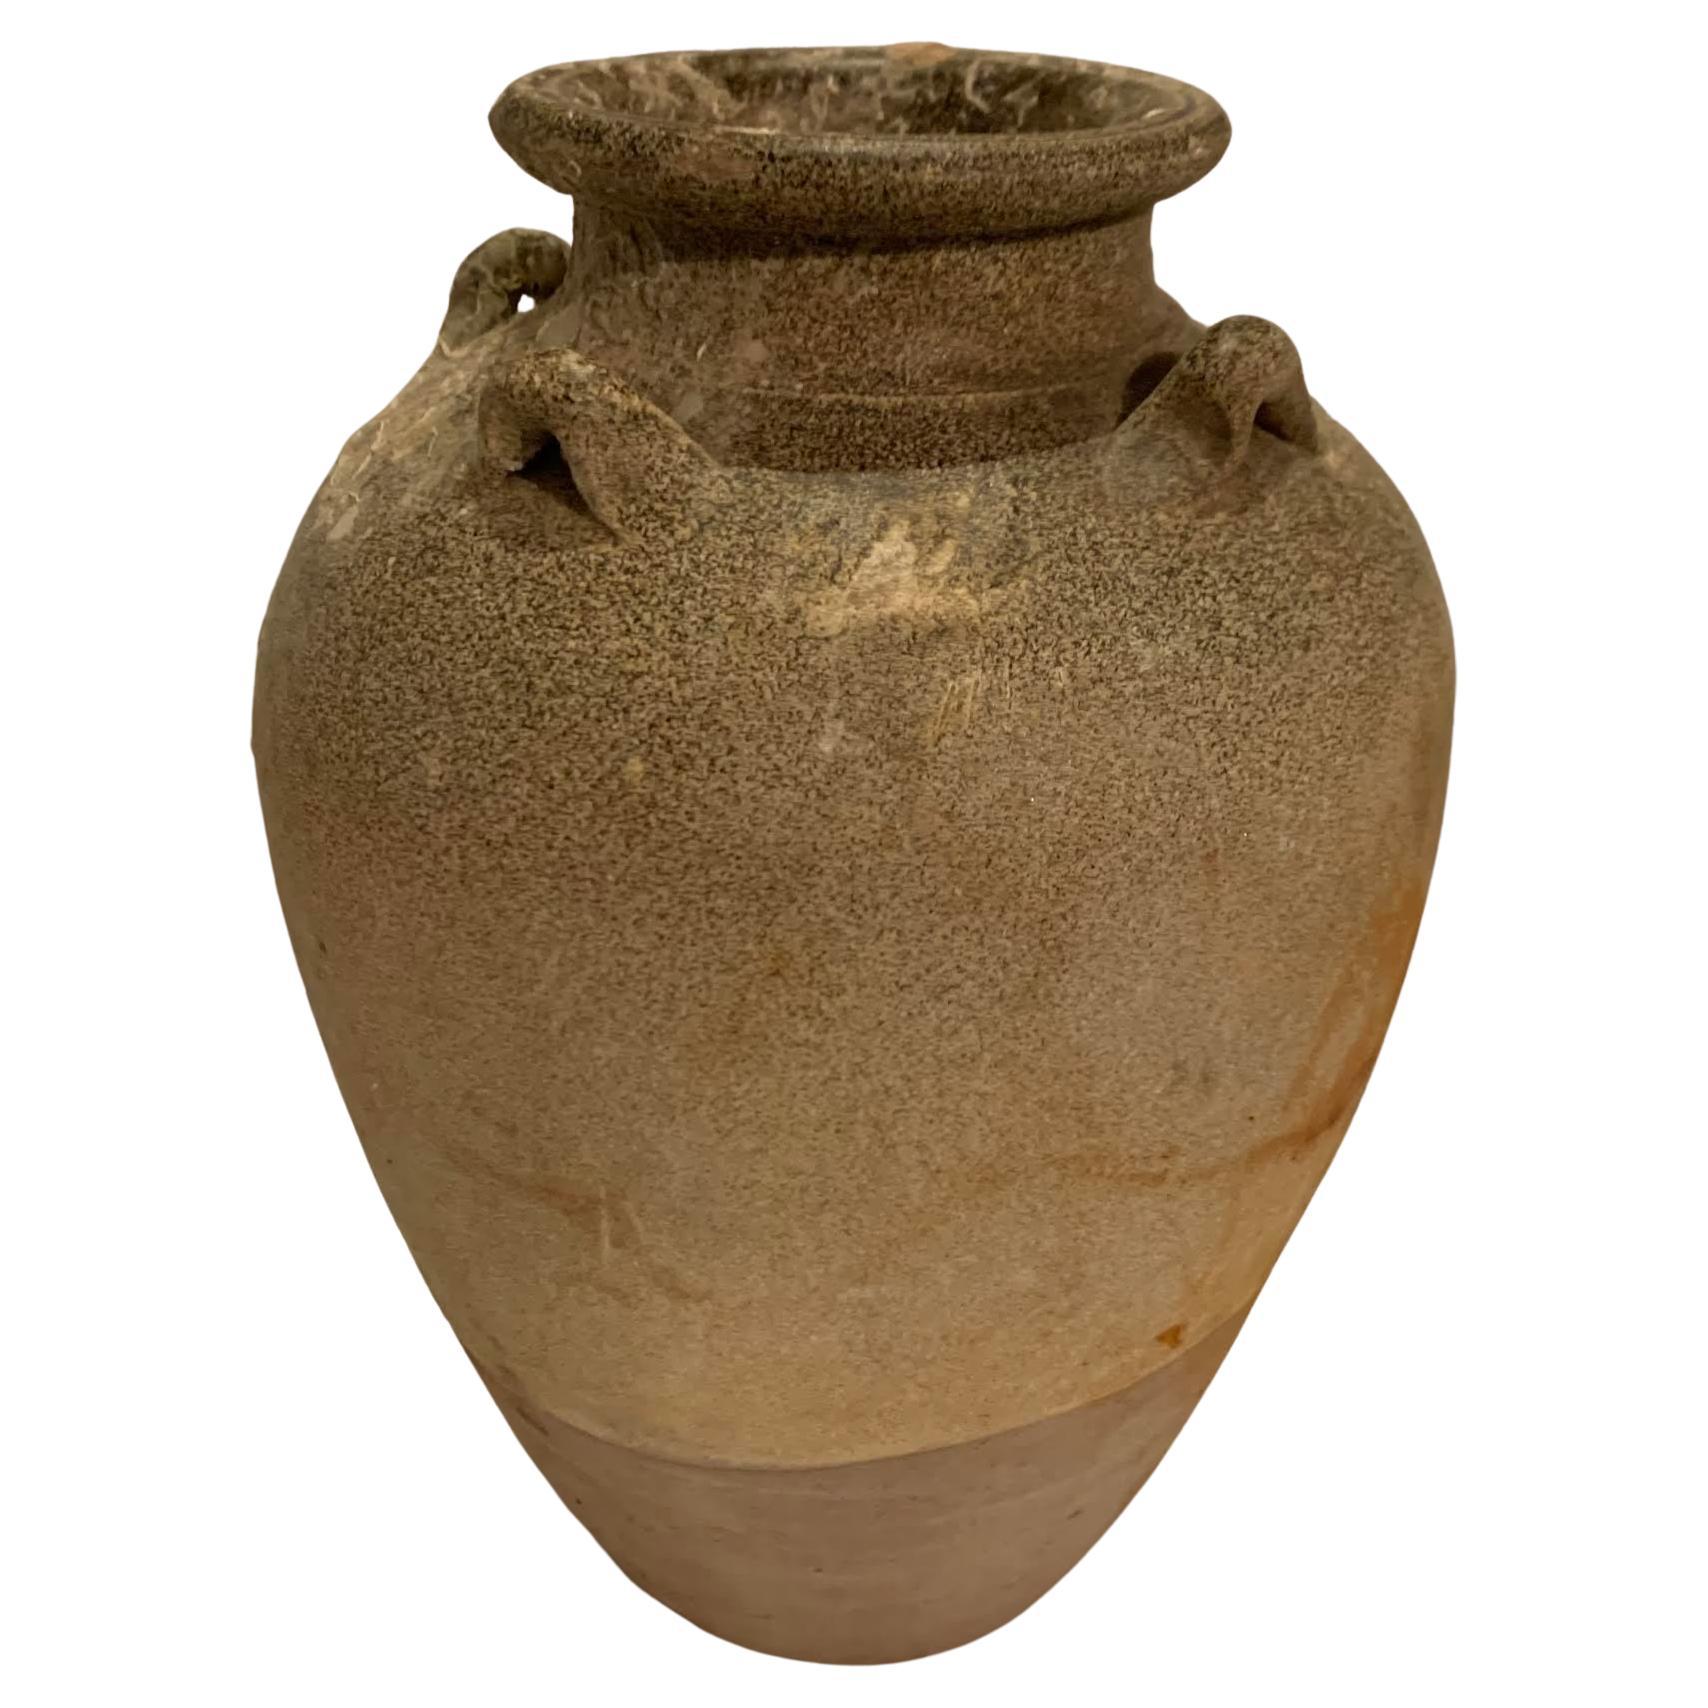 17th century Thailand vessel from the Sawankhalok region, noted for its pottery.
Traditional small handles and beautiful glaze with natural patina from age.


